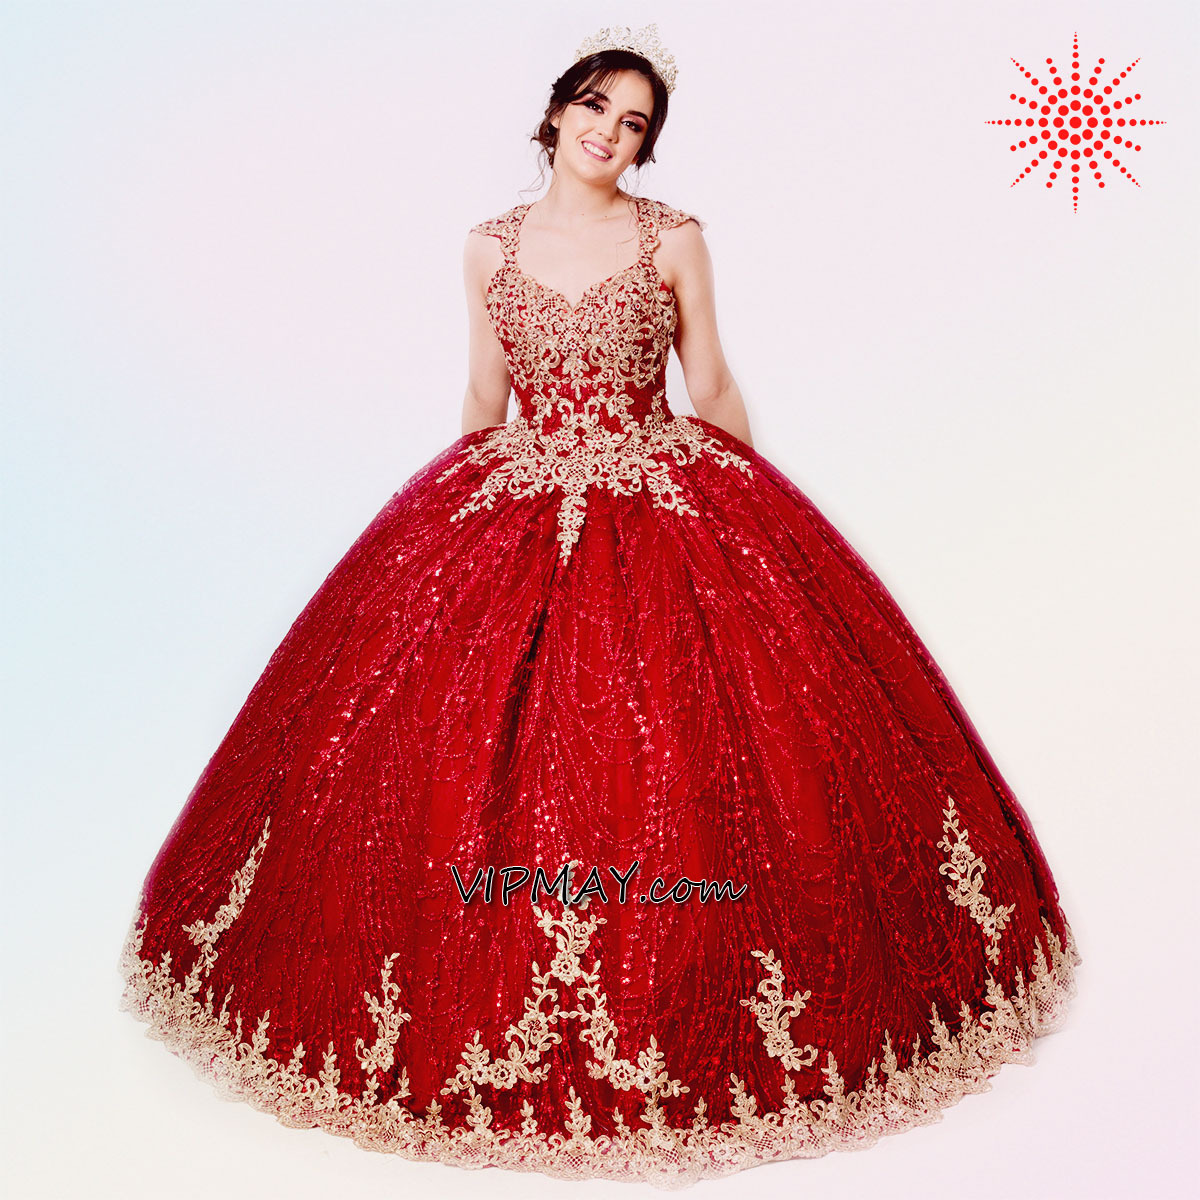 red and gold quinceanera dress,red sweet 16 dress,red quineanera dress,glitter tulle quinceanera dress,online cheap quinceanera dress,cheap quinceanera dress for sale,cheap beautiful quinceanera dress,quinceanera dress wholesale los angeles,quinceanera dress wholesale price,cheap quinceanera gown under 200 dollars,